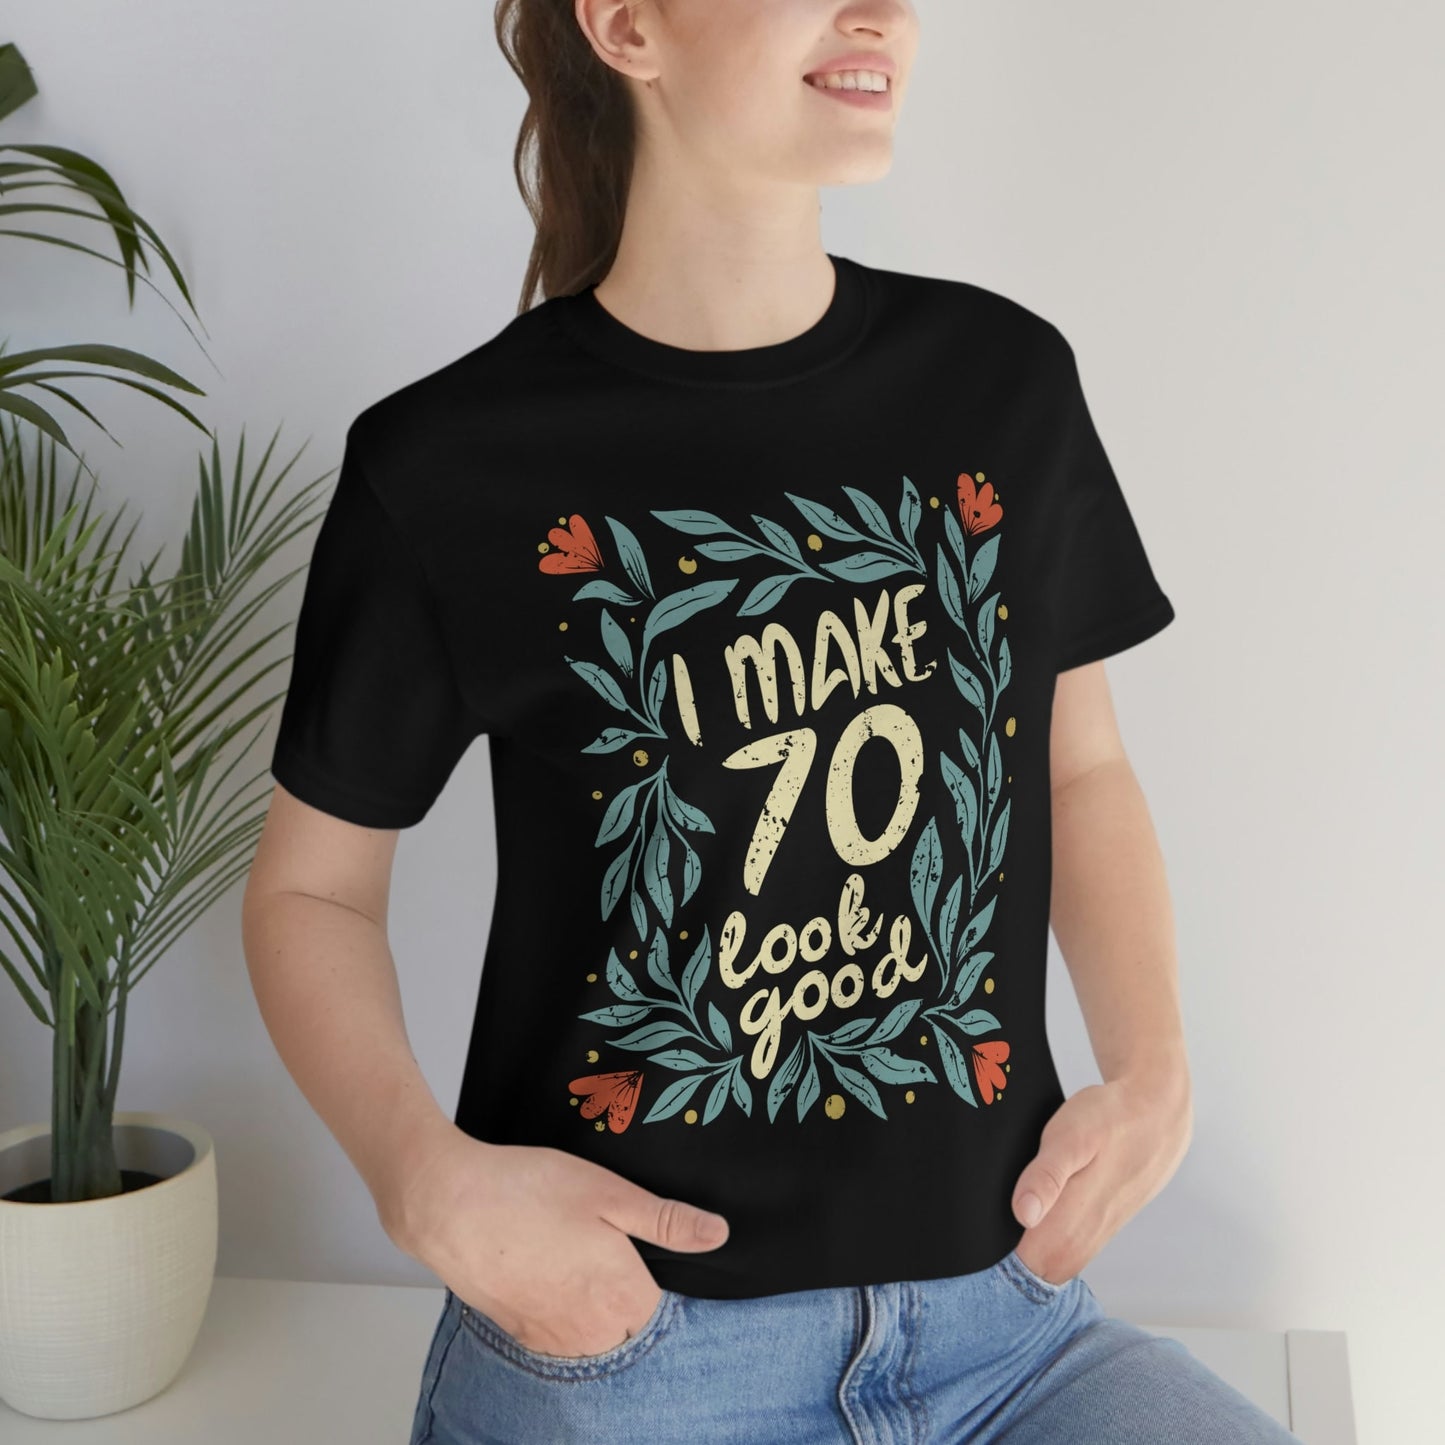 I Make 70 Look Good birthday gift t-shirt for women or wife, 70th Anniversary t-shirt